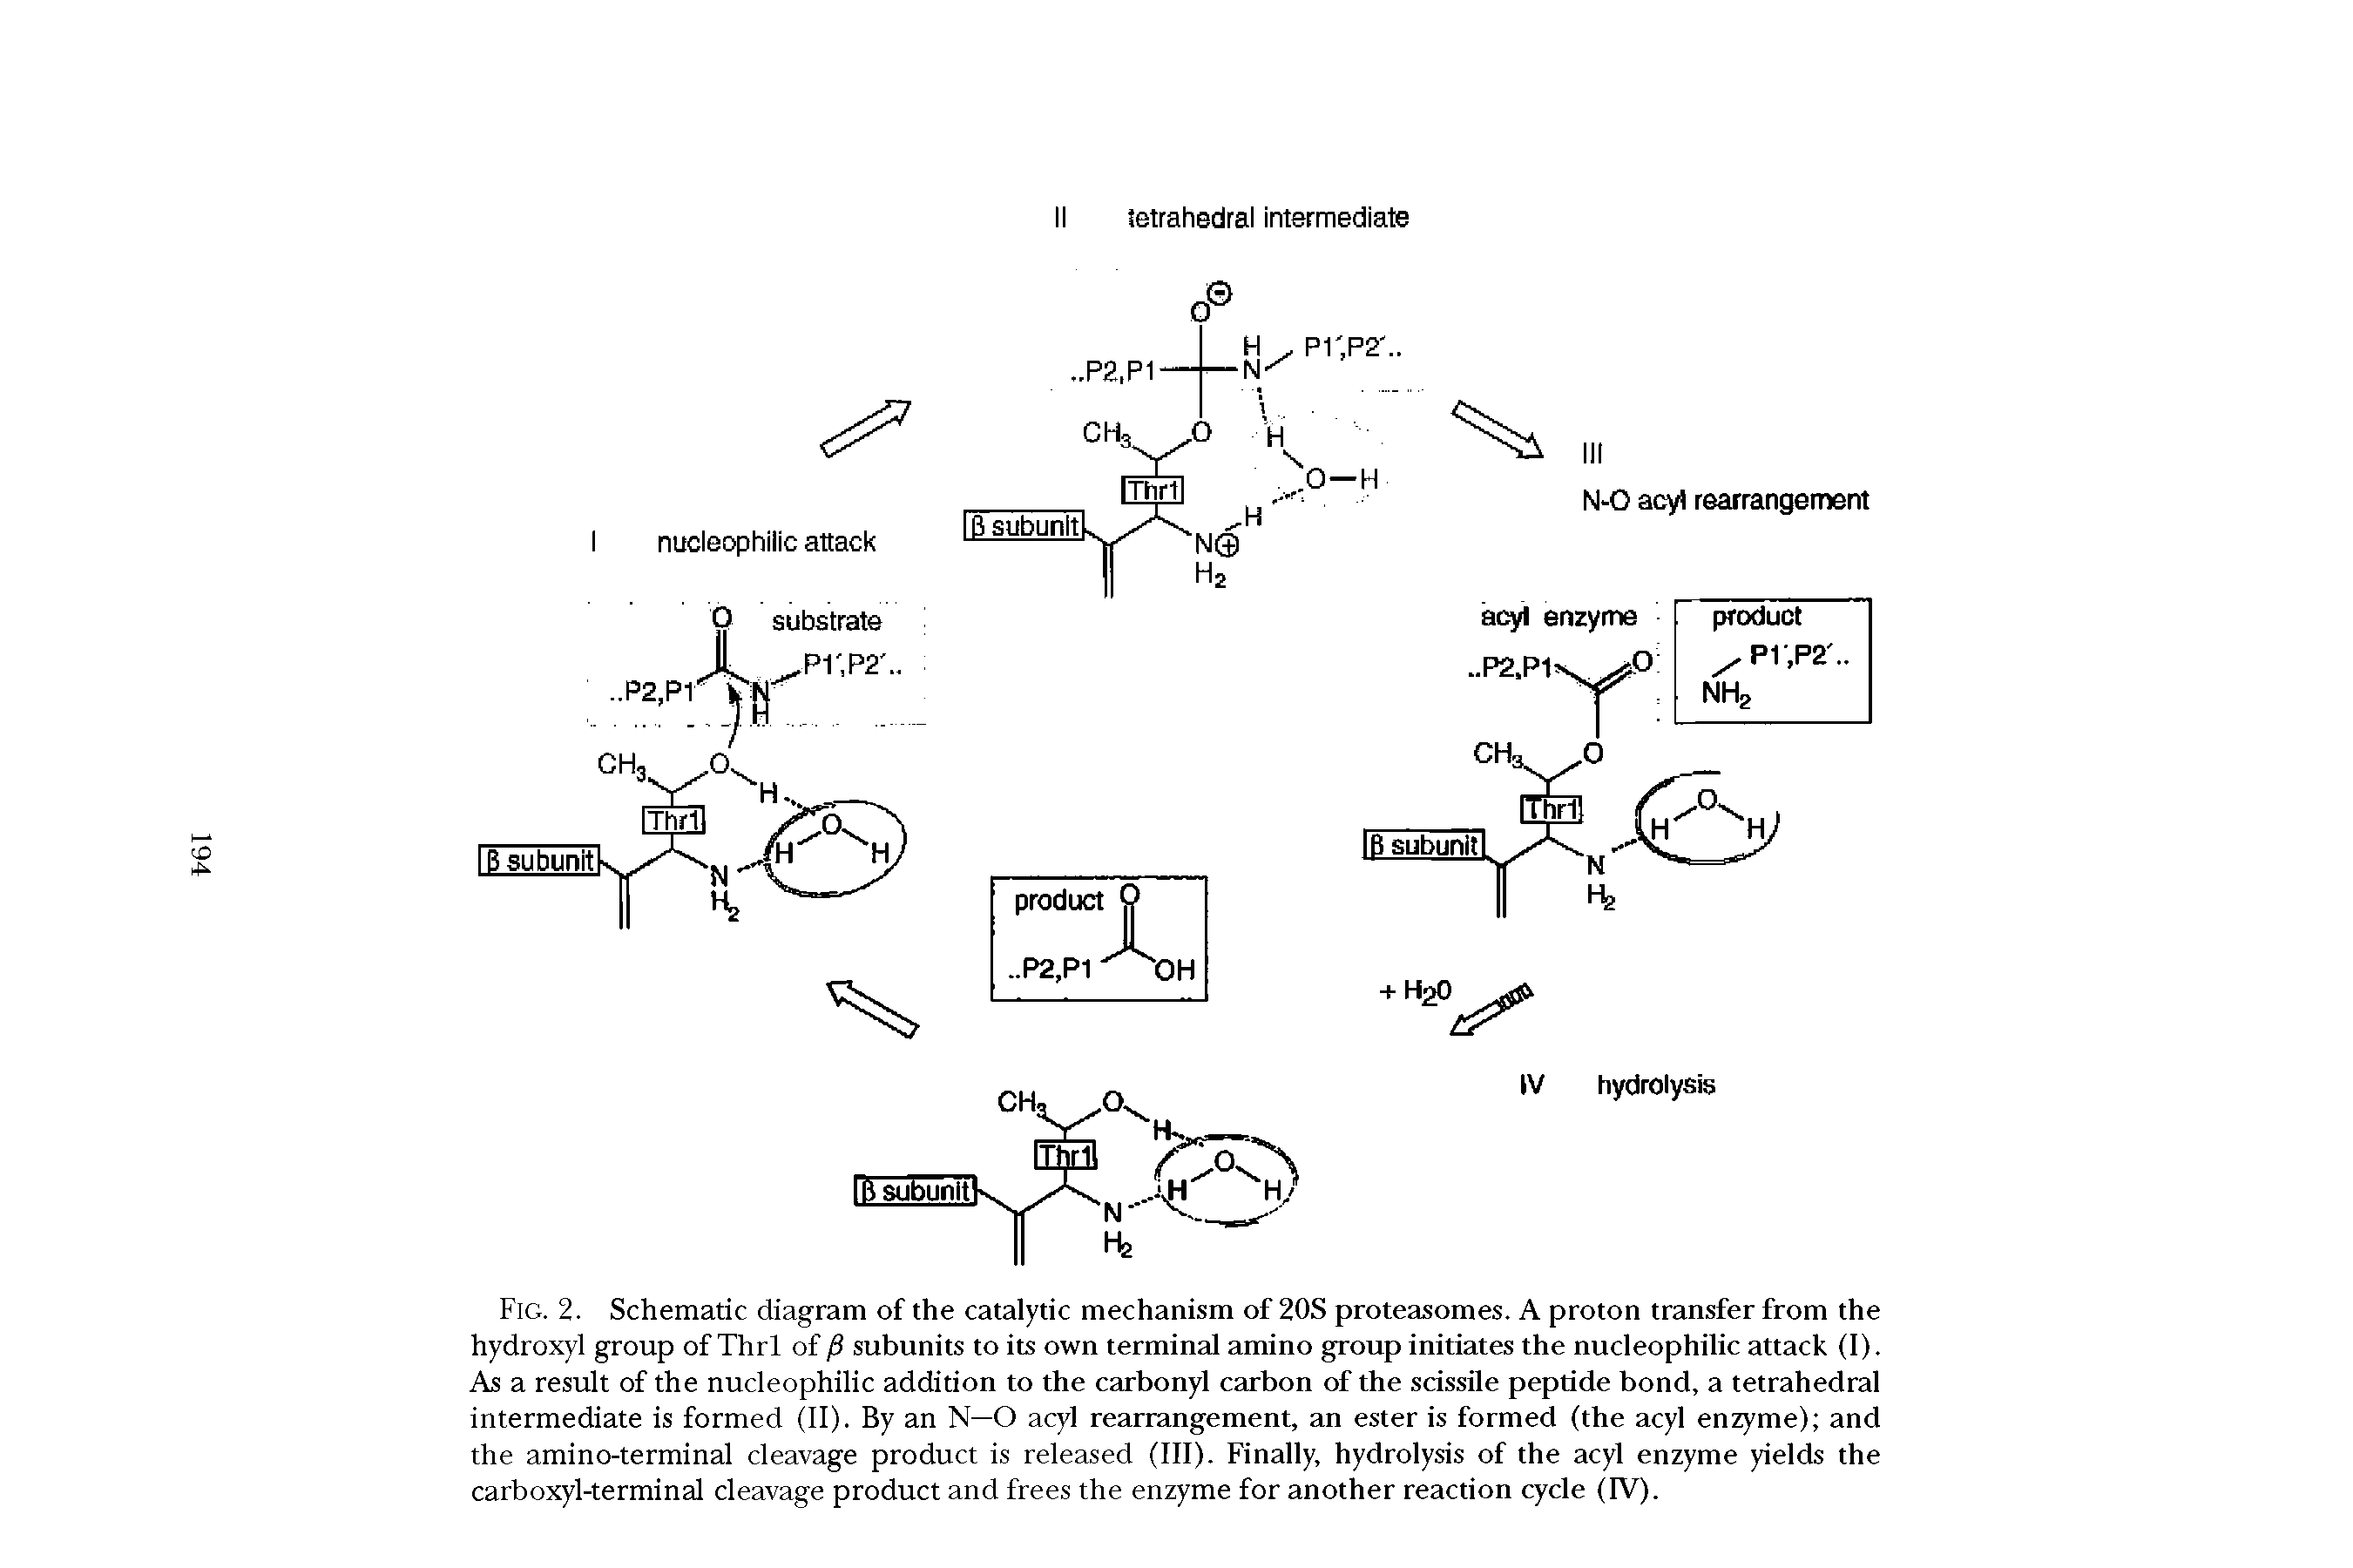 Fig. 2. Schematic diagram of the catalytic mechanism of 20S proteasomes. A proton transfer from the hydroxyl group of Thrl of /3 subunits to its own terminal amino group initiates the nucleophilic attack (I). As a result of the nucleophilic addition to the carbonyl carbon of the scissile peptide bond, a tetrahedral intermediate is formed (II). By an N—O acyl rearrangement, an ester is formed (the acyl enzyme) and the amino-terminal cleavage product is released (III). Finally, hydrolysis of the acyl enzyme yields the carboxyl-terminal cleavage product and frees the enzyme for another reaction cycle (IV).